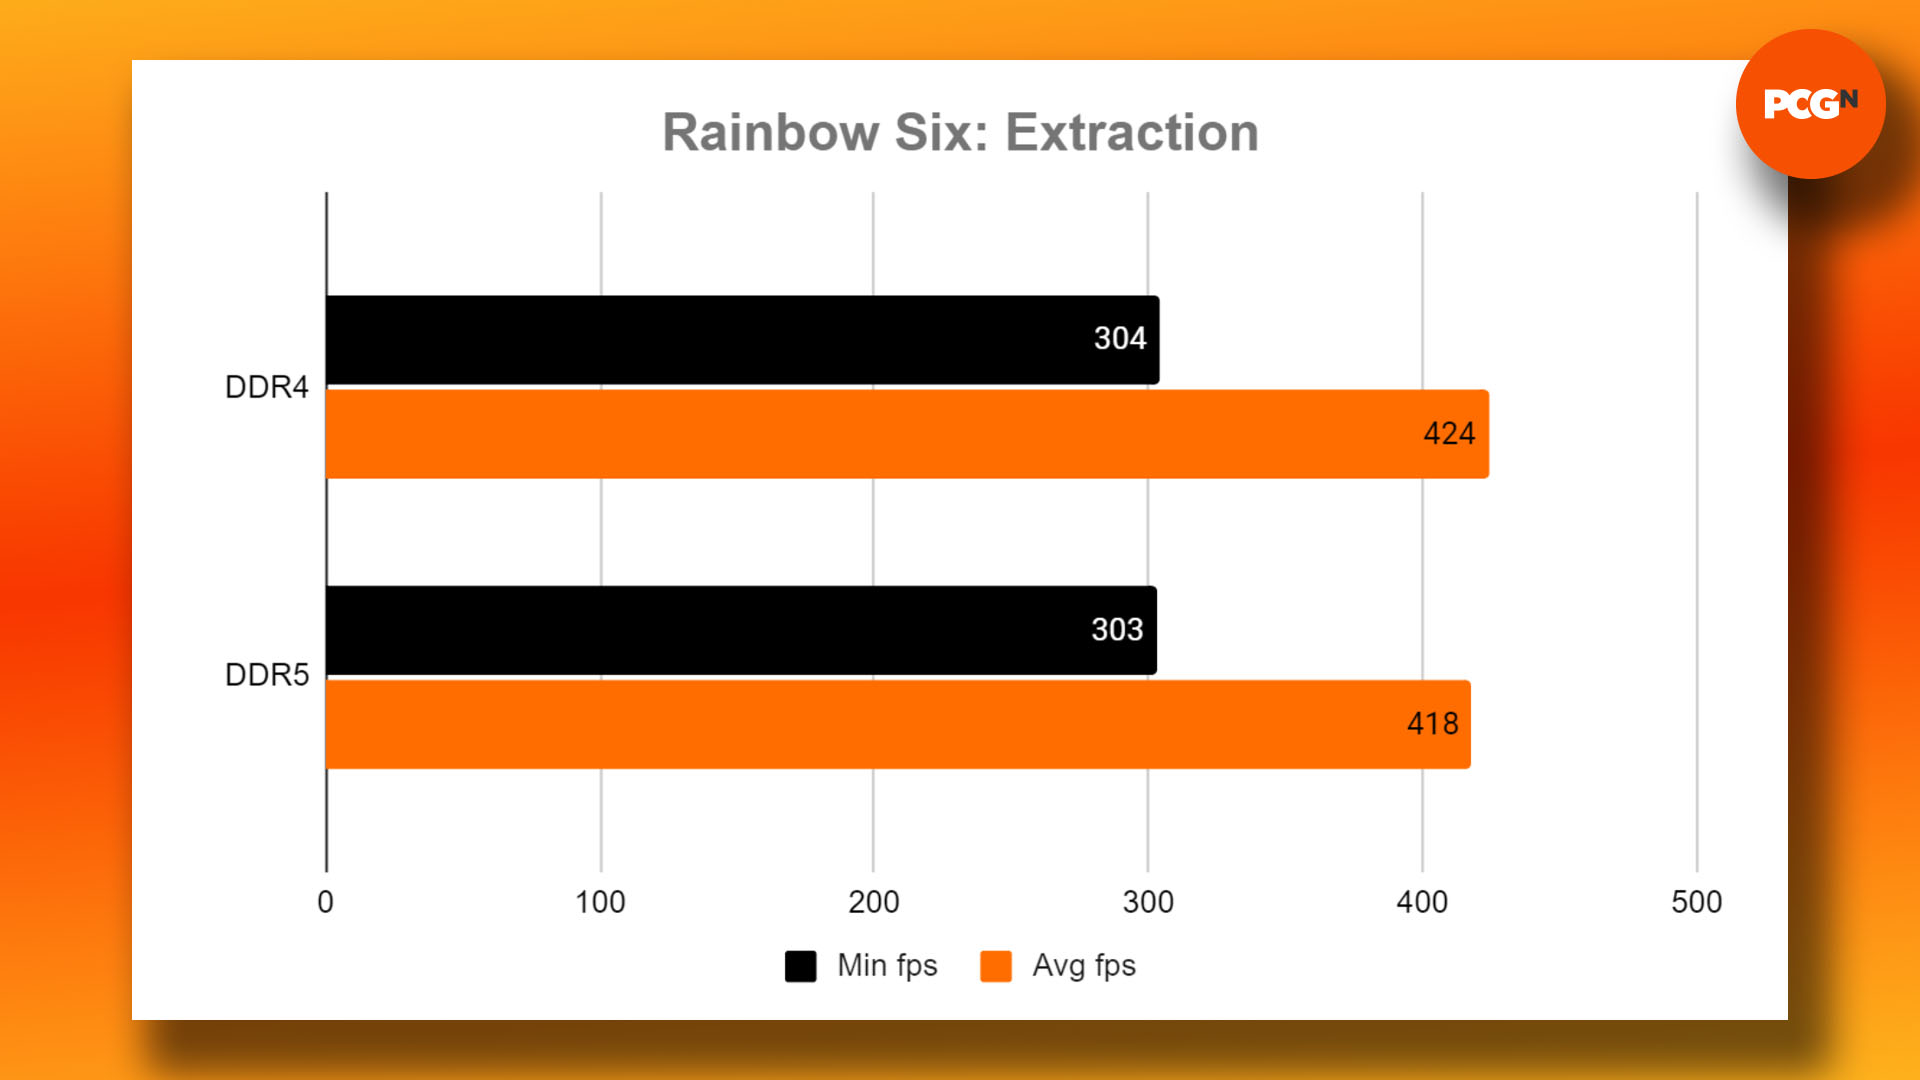 DDR4 vs DDR5 - which RAM to buy for gaming: Rainbow Six Extraction benchmark results graph